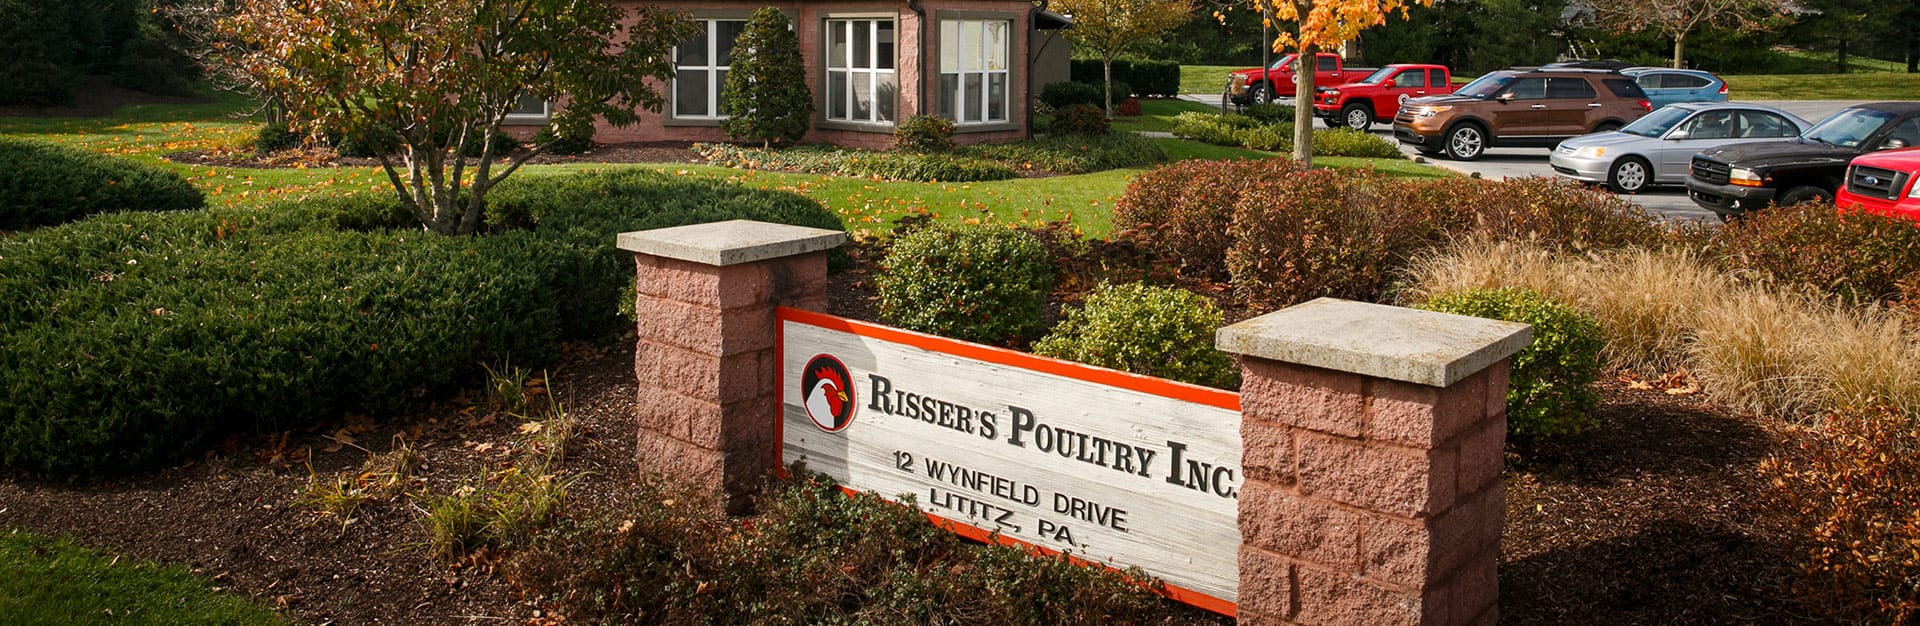 Office building with Rissers Poultry, Inc. sign in the foreground